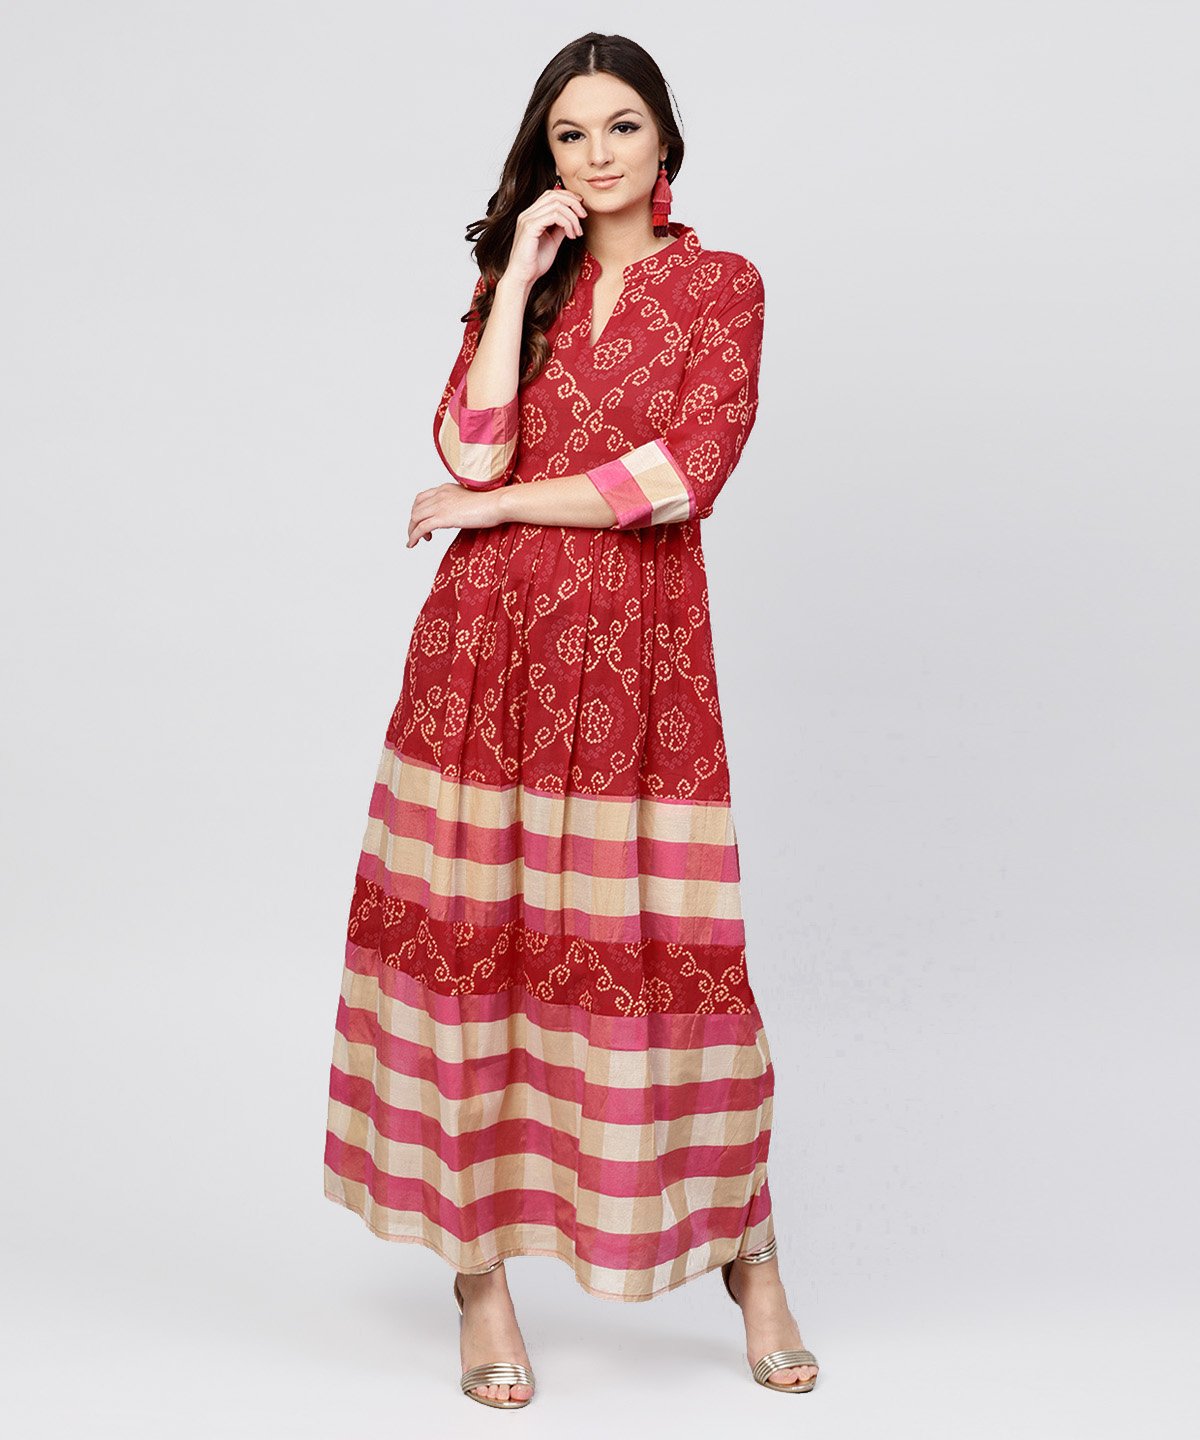 Women's Red Printed Dress With Mandarin Collar And 3/4 Sleeves - Nayo Clothing